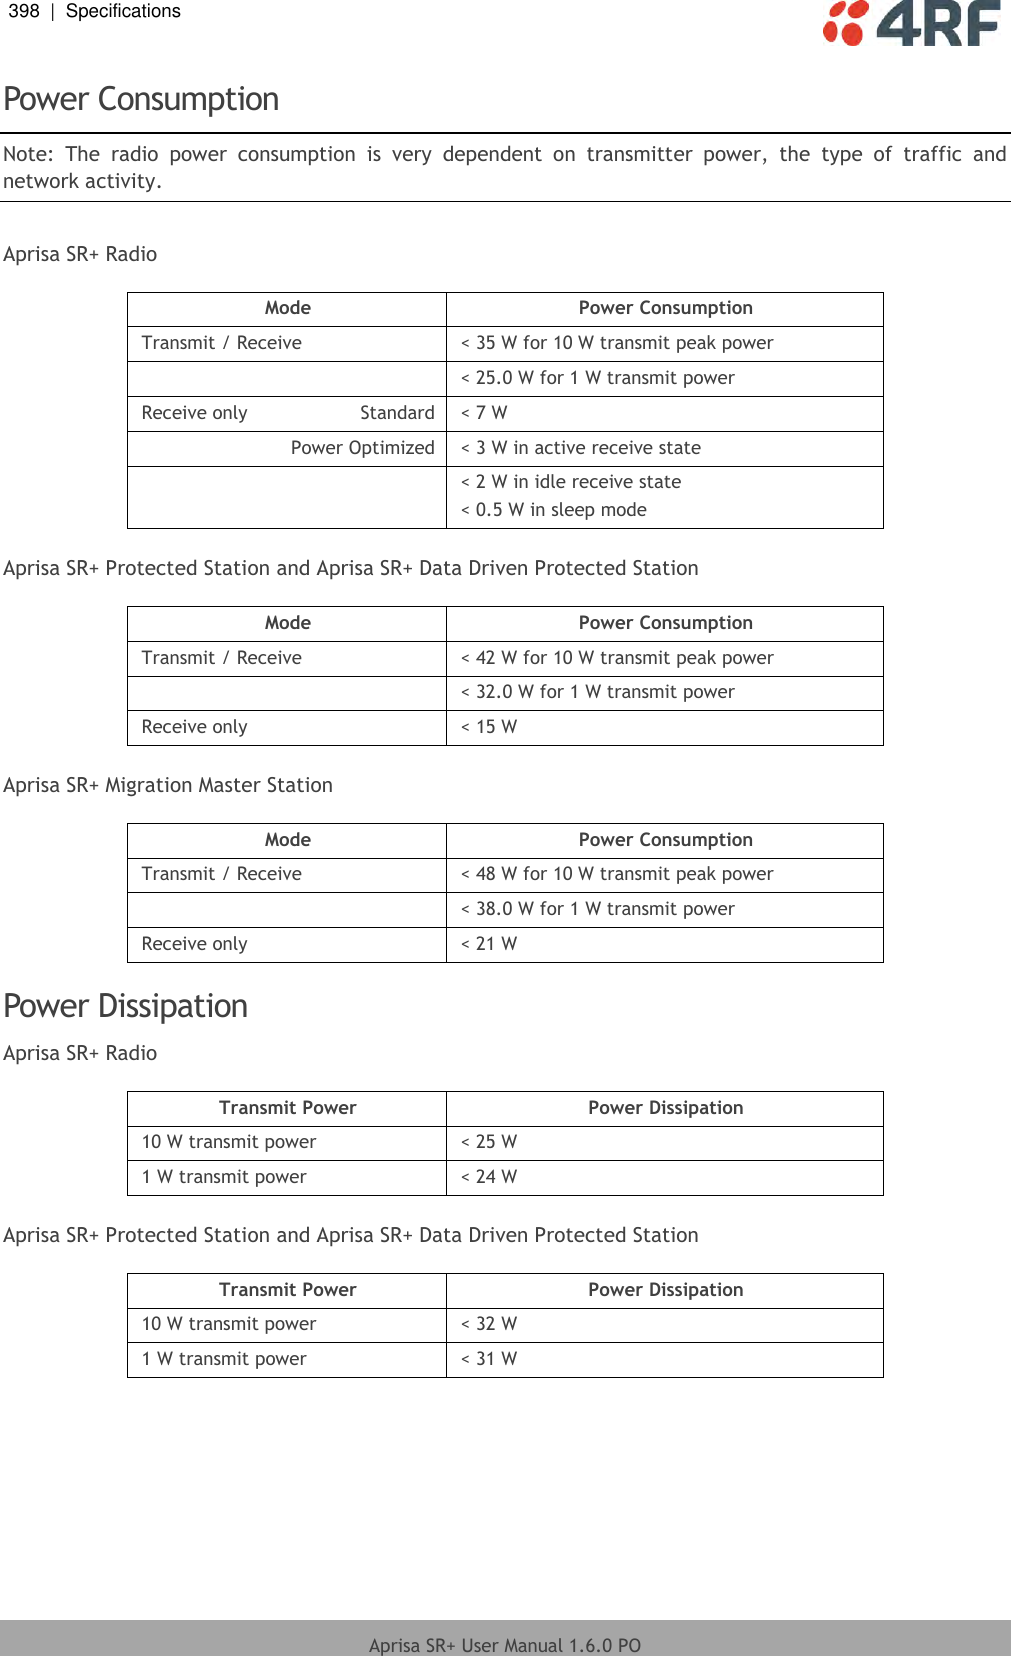 398  |  Specifications   Aprisa SR+ User Manual 1.6.0 PO  Power Consumption Note:  The  radio  power  consumption  is  very  dependent  on  transmitter  power,  the  type  of  traffic  and network activity.  Aprisa SR+ Radio  Mode Power Consumption Transmit / Receive &lt; 35 W for 10 W transmit peak power  &lt; 25.0 W for 1 W transmit power Receive only Standard &lt; 7 W  Power Optimized &lt; 3 W in active receive state  &lt; 2 W in idle receive state &lt; 0.5 W in sleep mode  Aprisa SR+ Protected Station and Aprisa SR+ Data Driven Protected Station  Mode Power Consumption Transmit / Receive &lt; 42 W for 10 W transmit peak power  &lt; 32.0 W for 1 W transmit power Receive only &lt; 15 W  Aprisa SR+ Migration Master Station  Mode Power Consumption Transmit / Receive &lt; 48 W for 10 W transmit peak power  &lt; 38.0 W for 1 W transmit power Receive only &lt; 21 W  Power Dissipation Aprisa SR+ Radio  Transmit Power Power Dissipation 10 W transmit power &lt; 25 W 1 W transmit power &lt; 24 W  Aprisa SR+ Protected Station and Aprisa SR+ Data Driven Protected Station  Transmit Power Power Dissipation 10 W transmit power &lt; 32 W 1 W transmit power &lt; 31 W  